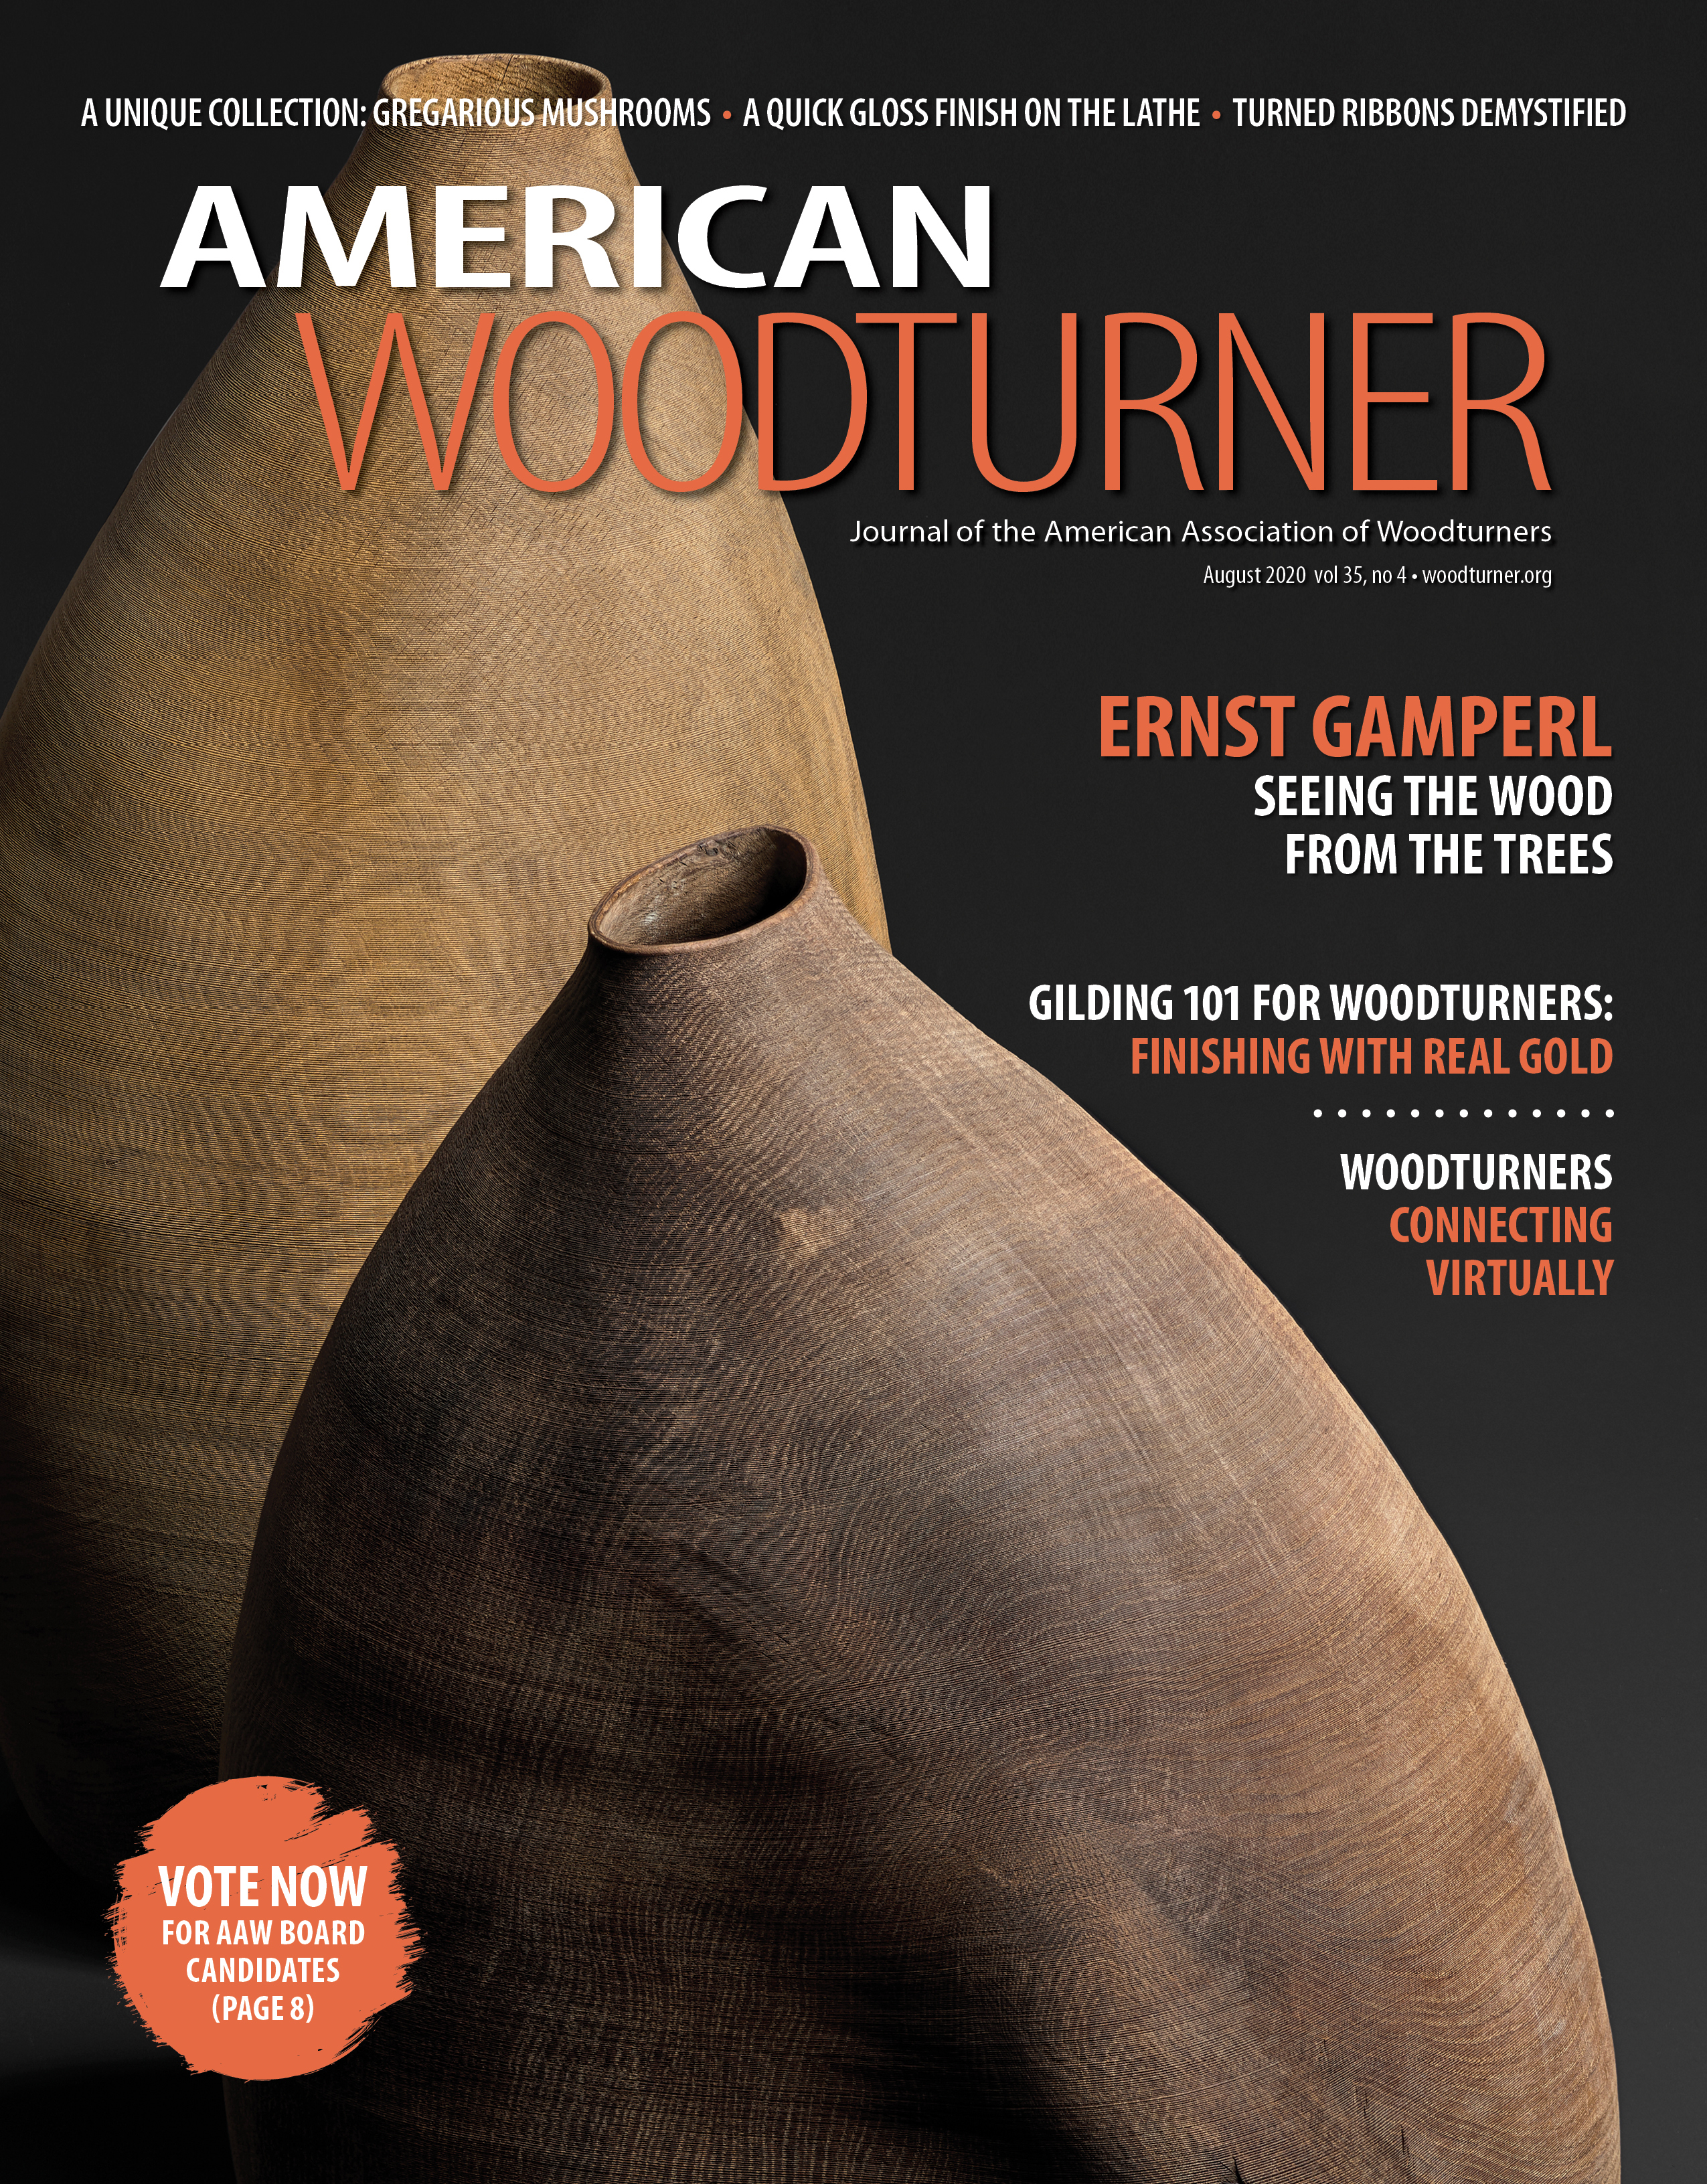 American Woodturner 35 issue 4 Replacement